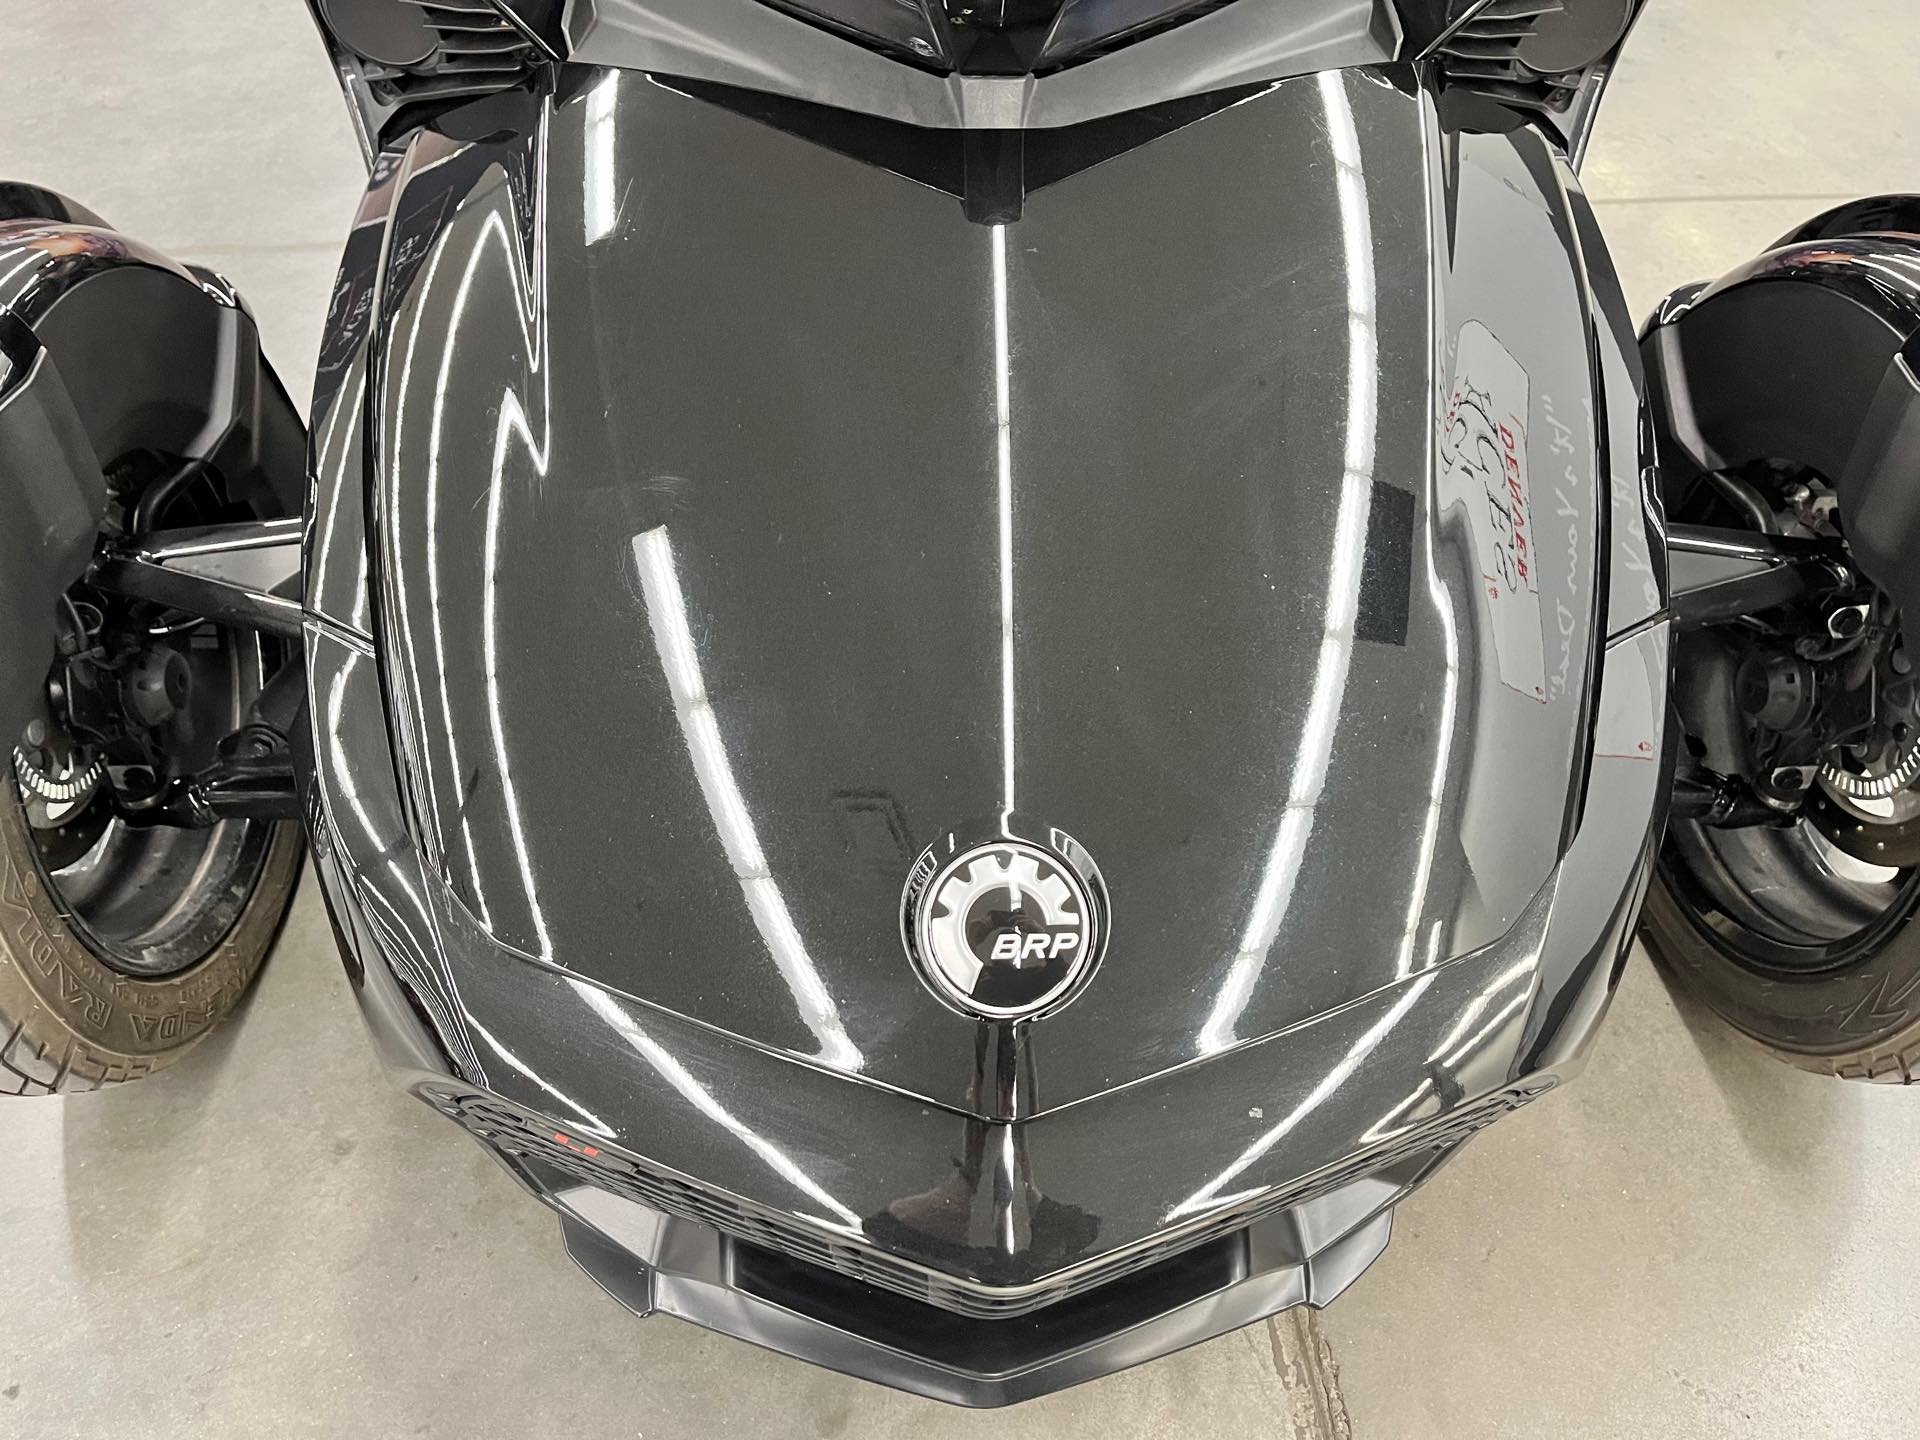 2021 Can-Am Spyder F3 Base at Aces Motorcycles - Denver